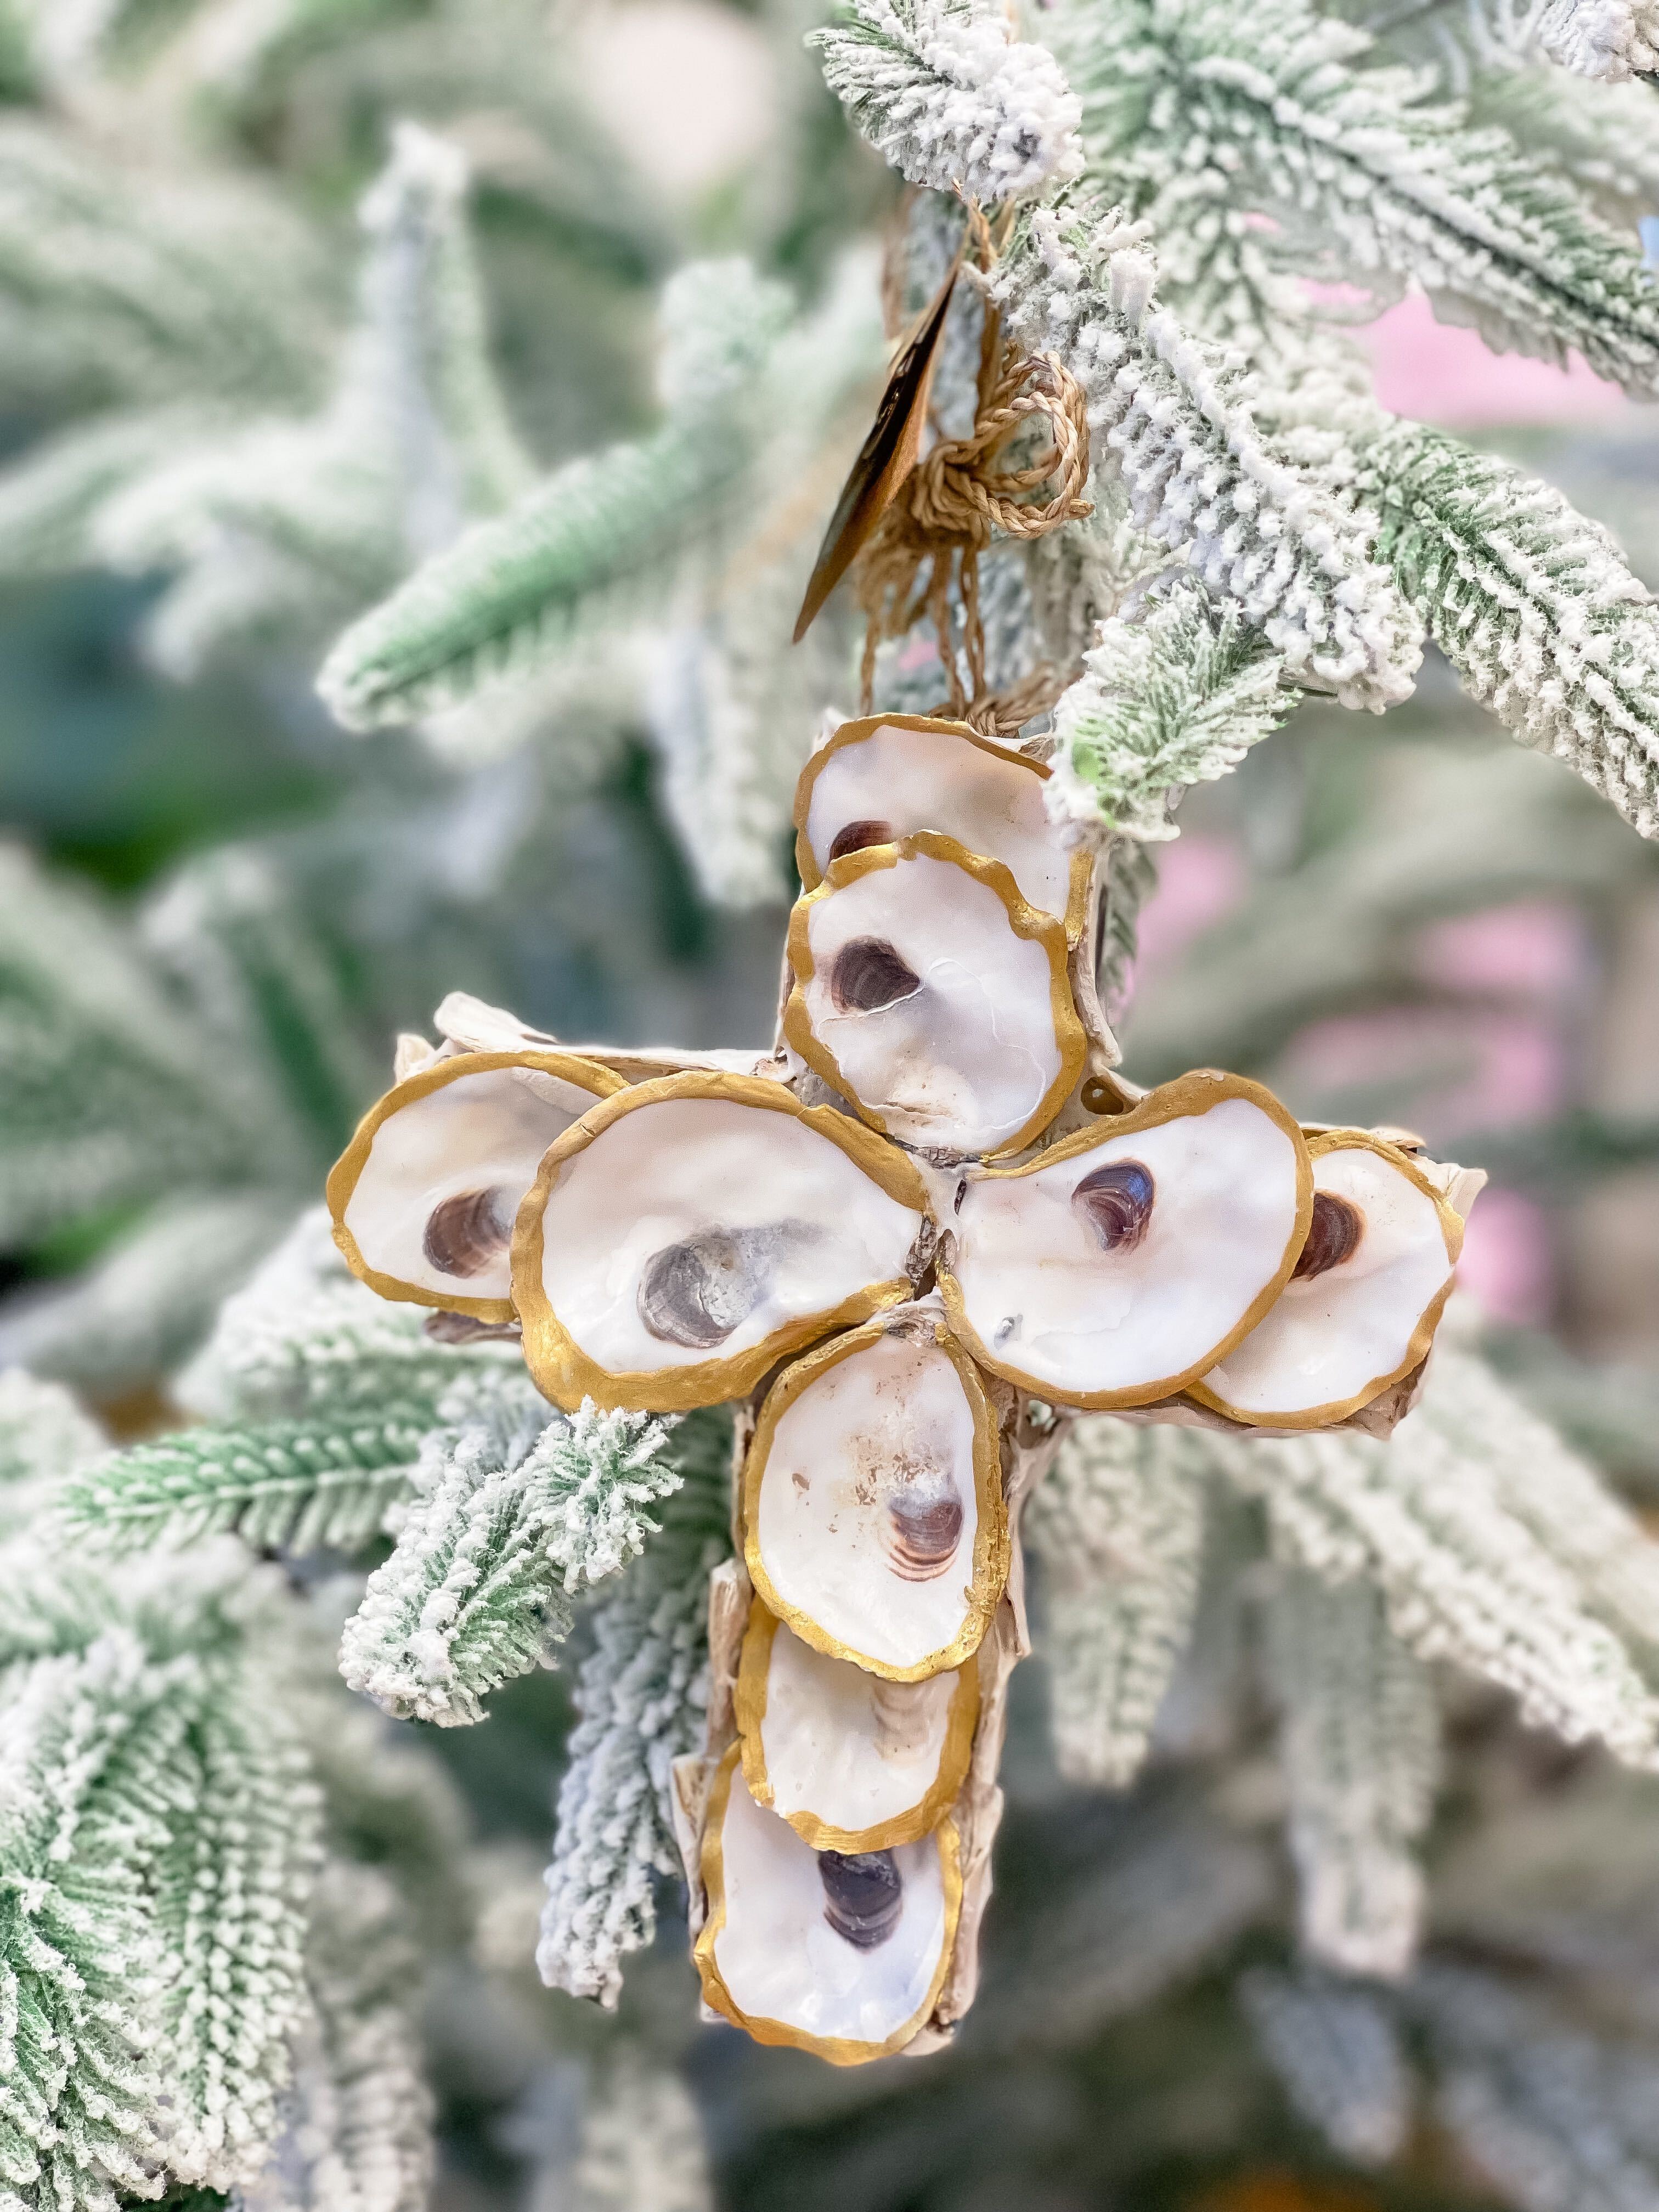 Gold Oyster Cross Ornaments by Mud Pie - Choice of Style